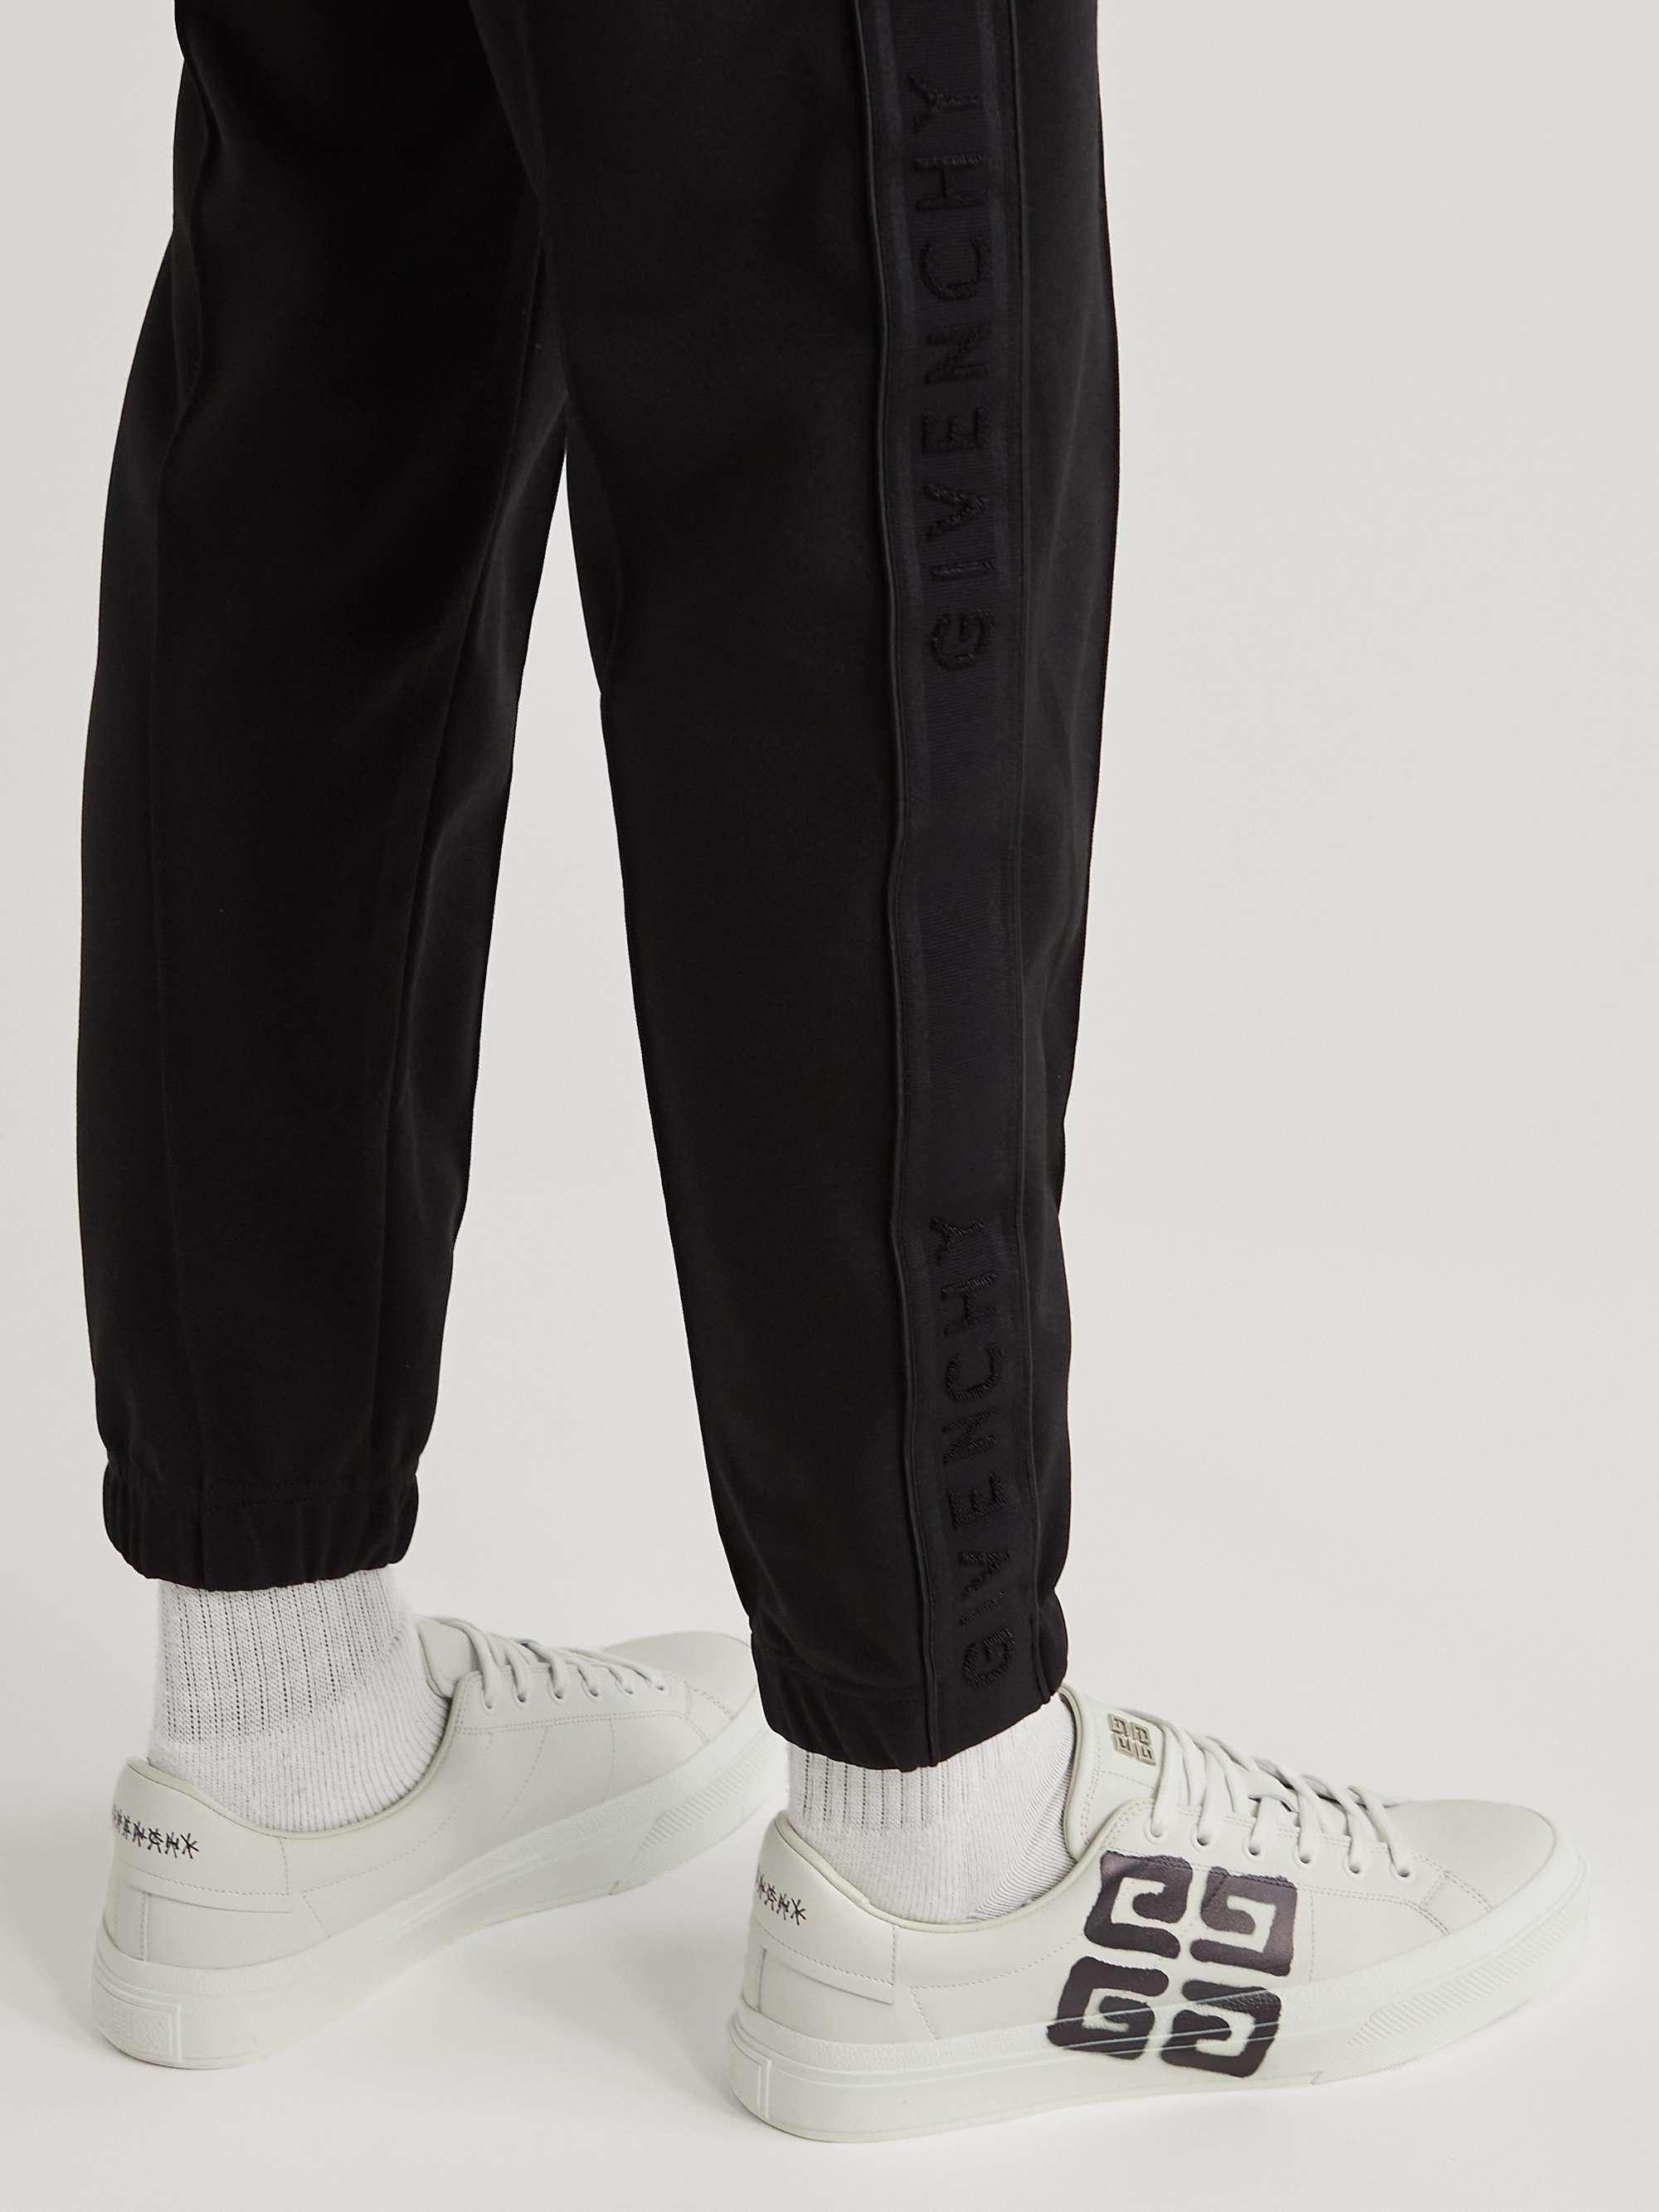 White City Sport Leather Sneakers | GIVENCHY | MR PORTER